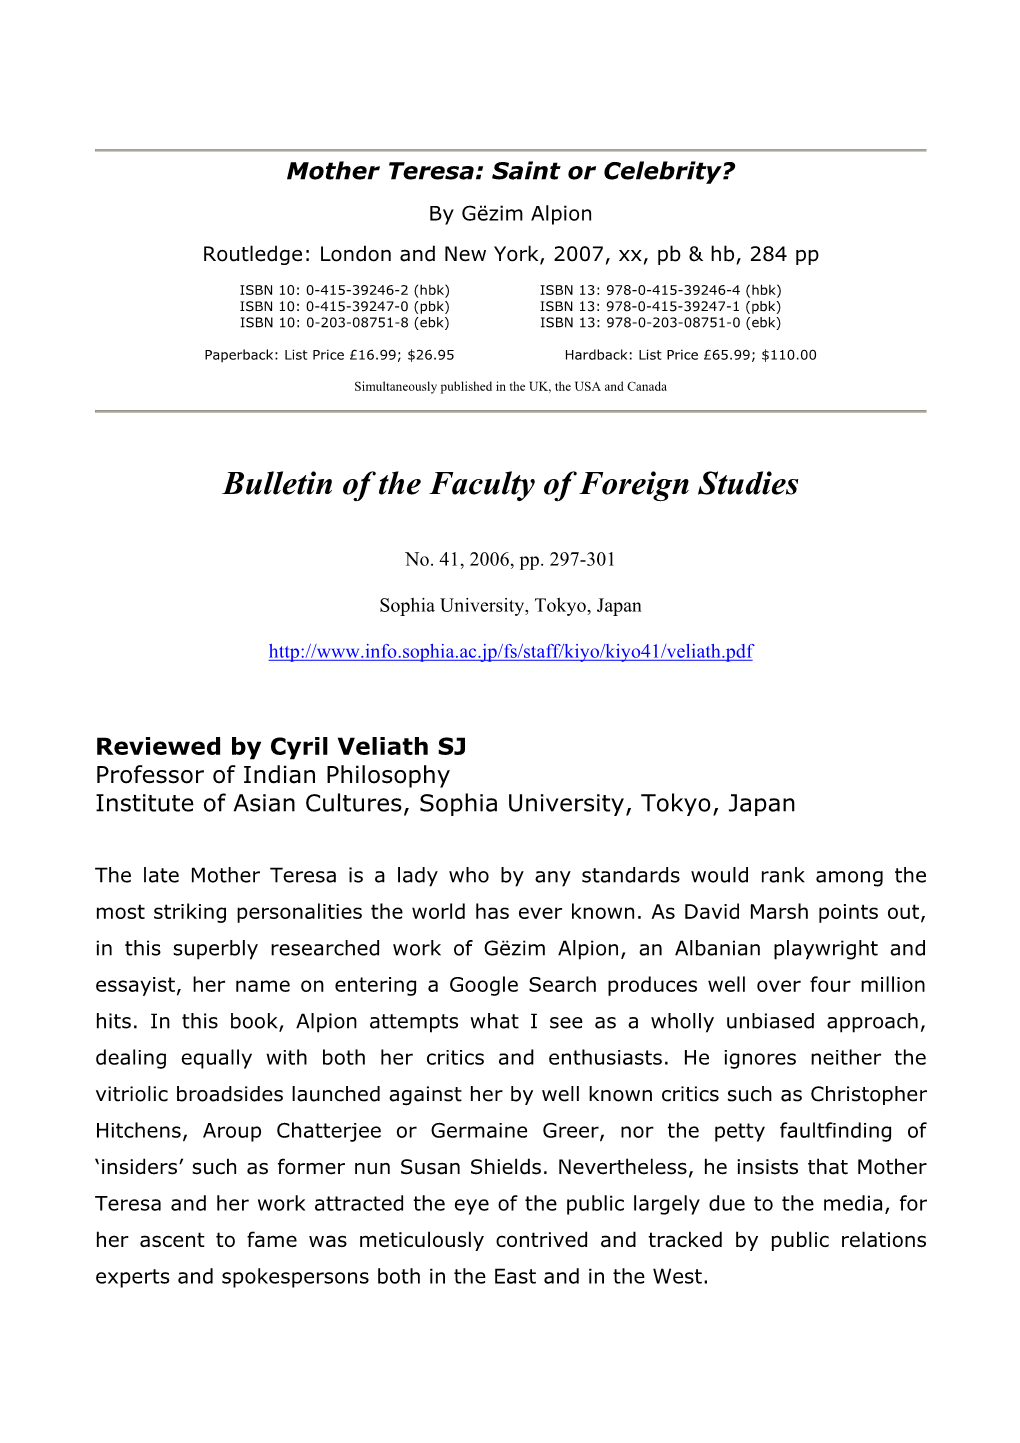 Cyril Veliath, Bulletin of the Faculty of Foreign Studies, No. 41, 2006